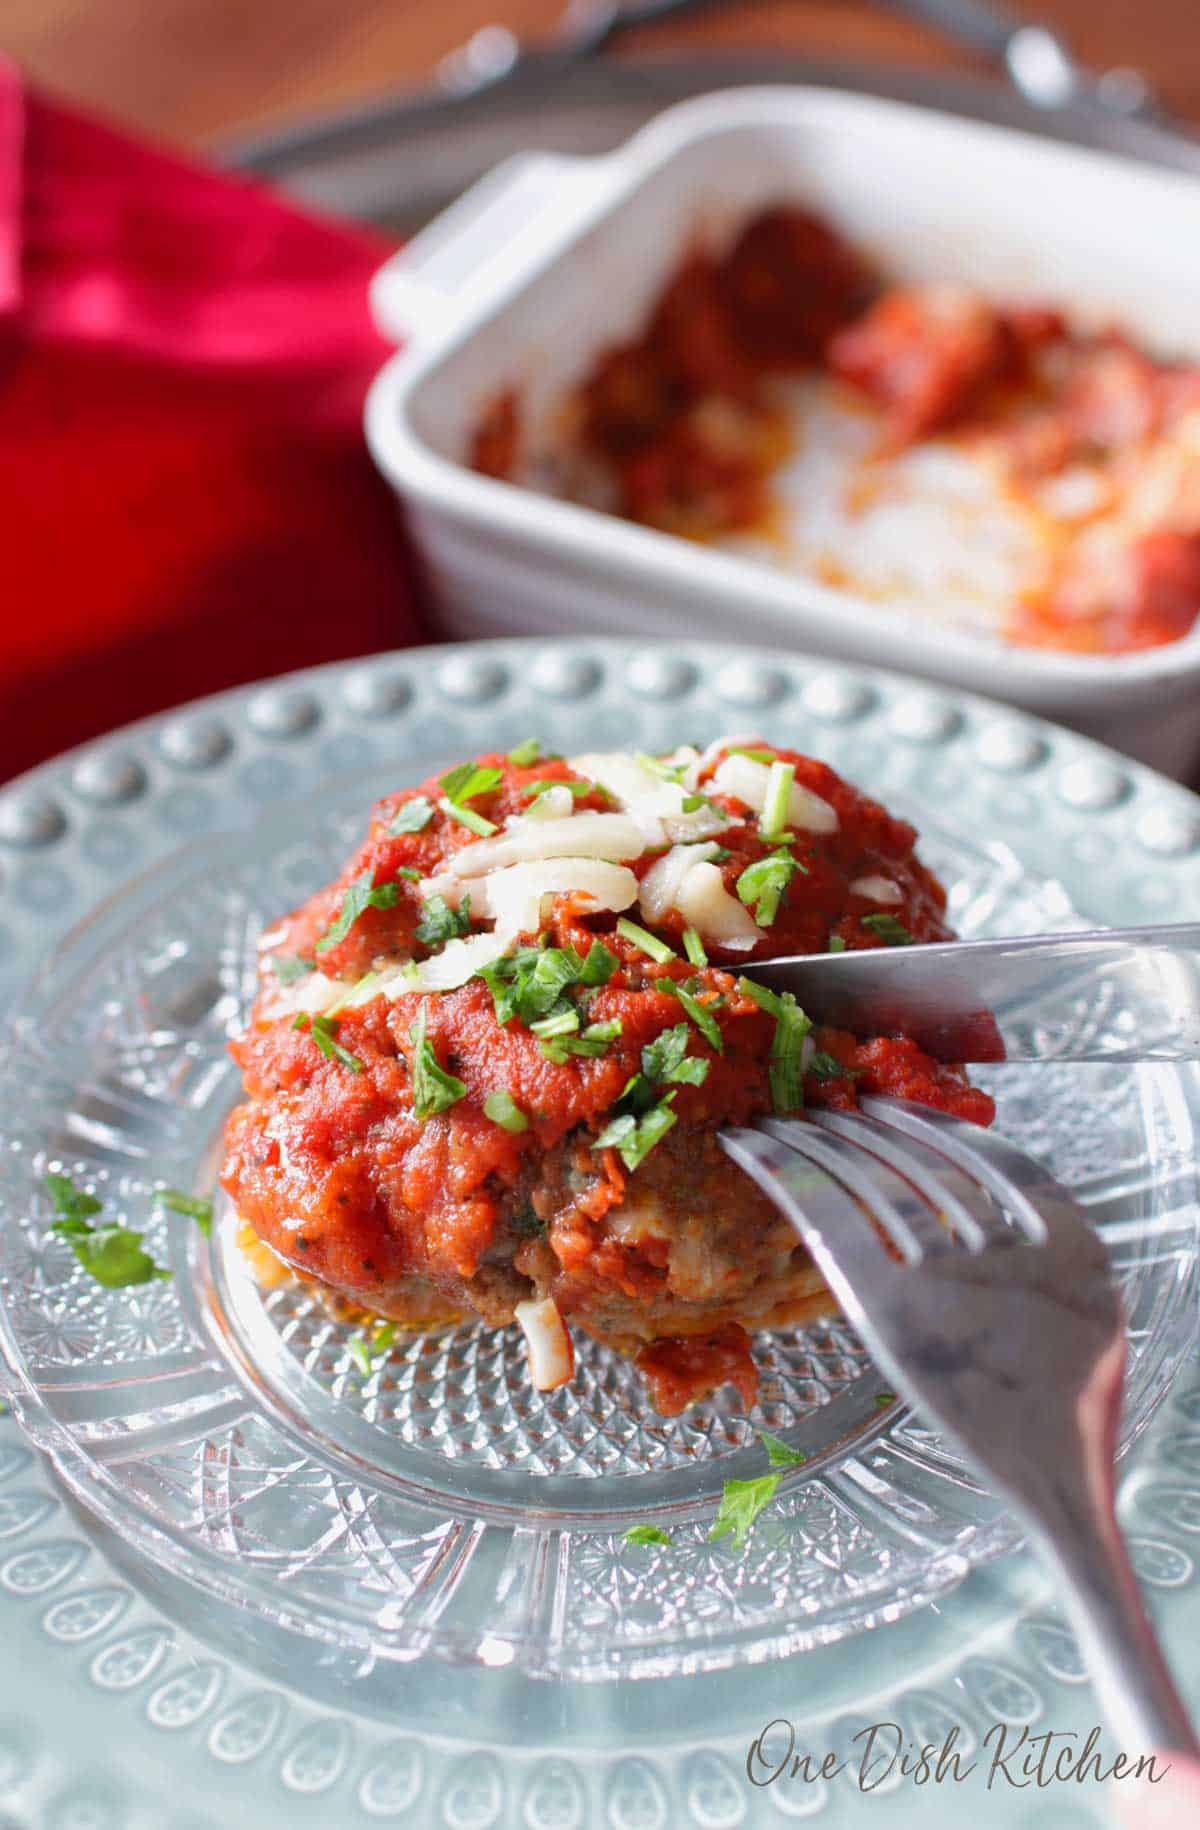 A fork and knife cutting into a meatball topped with tomato sauce and melted parmesan cheese.